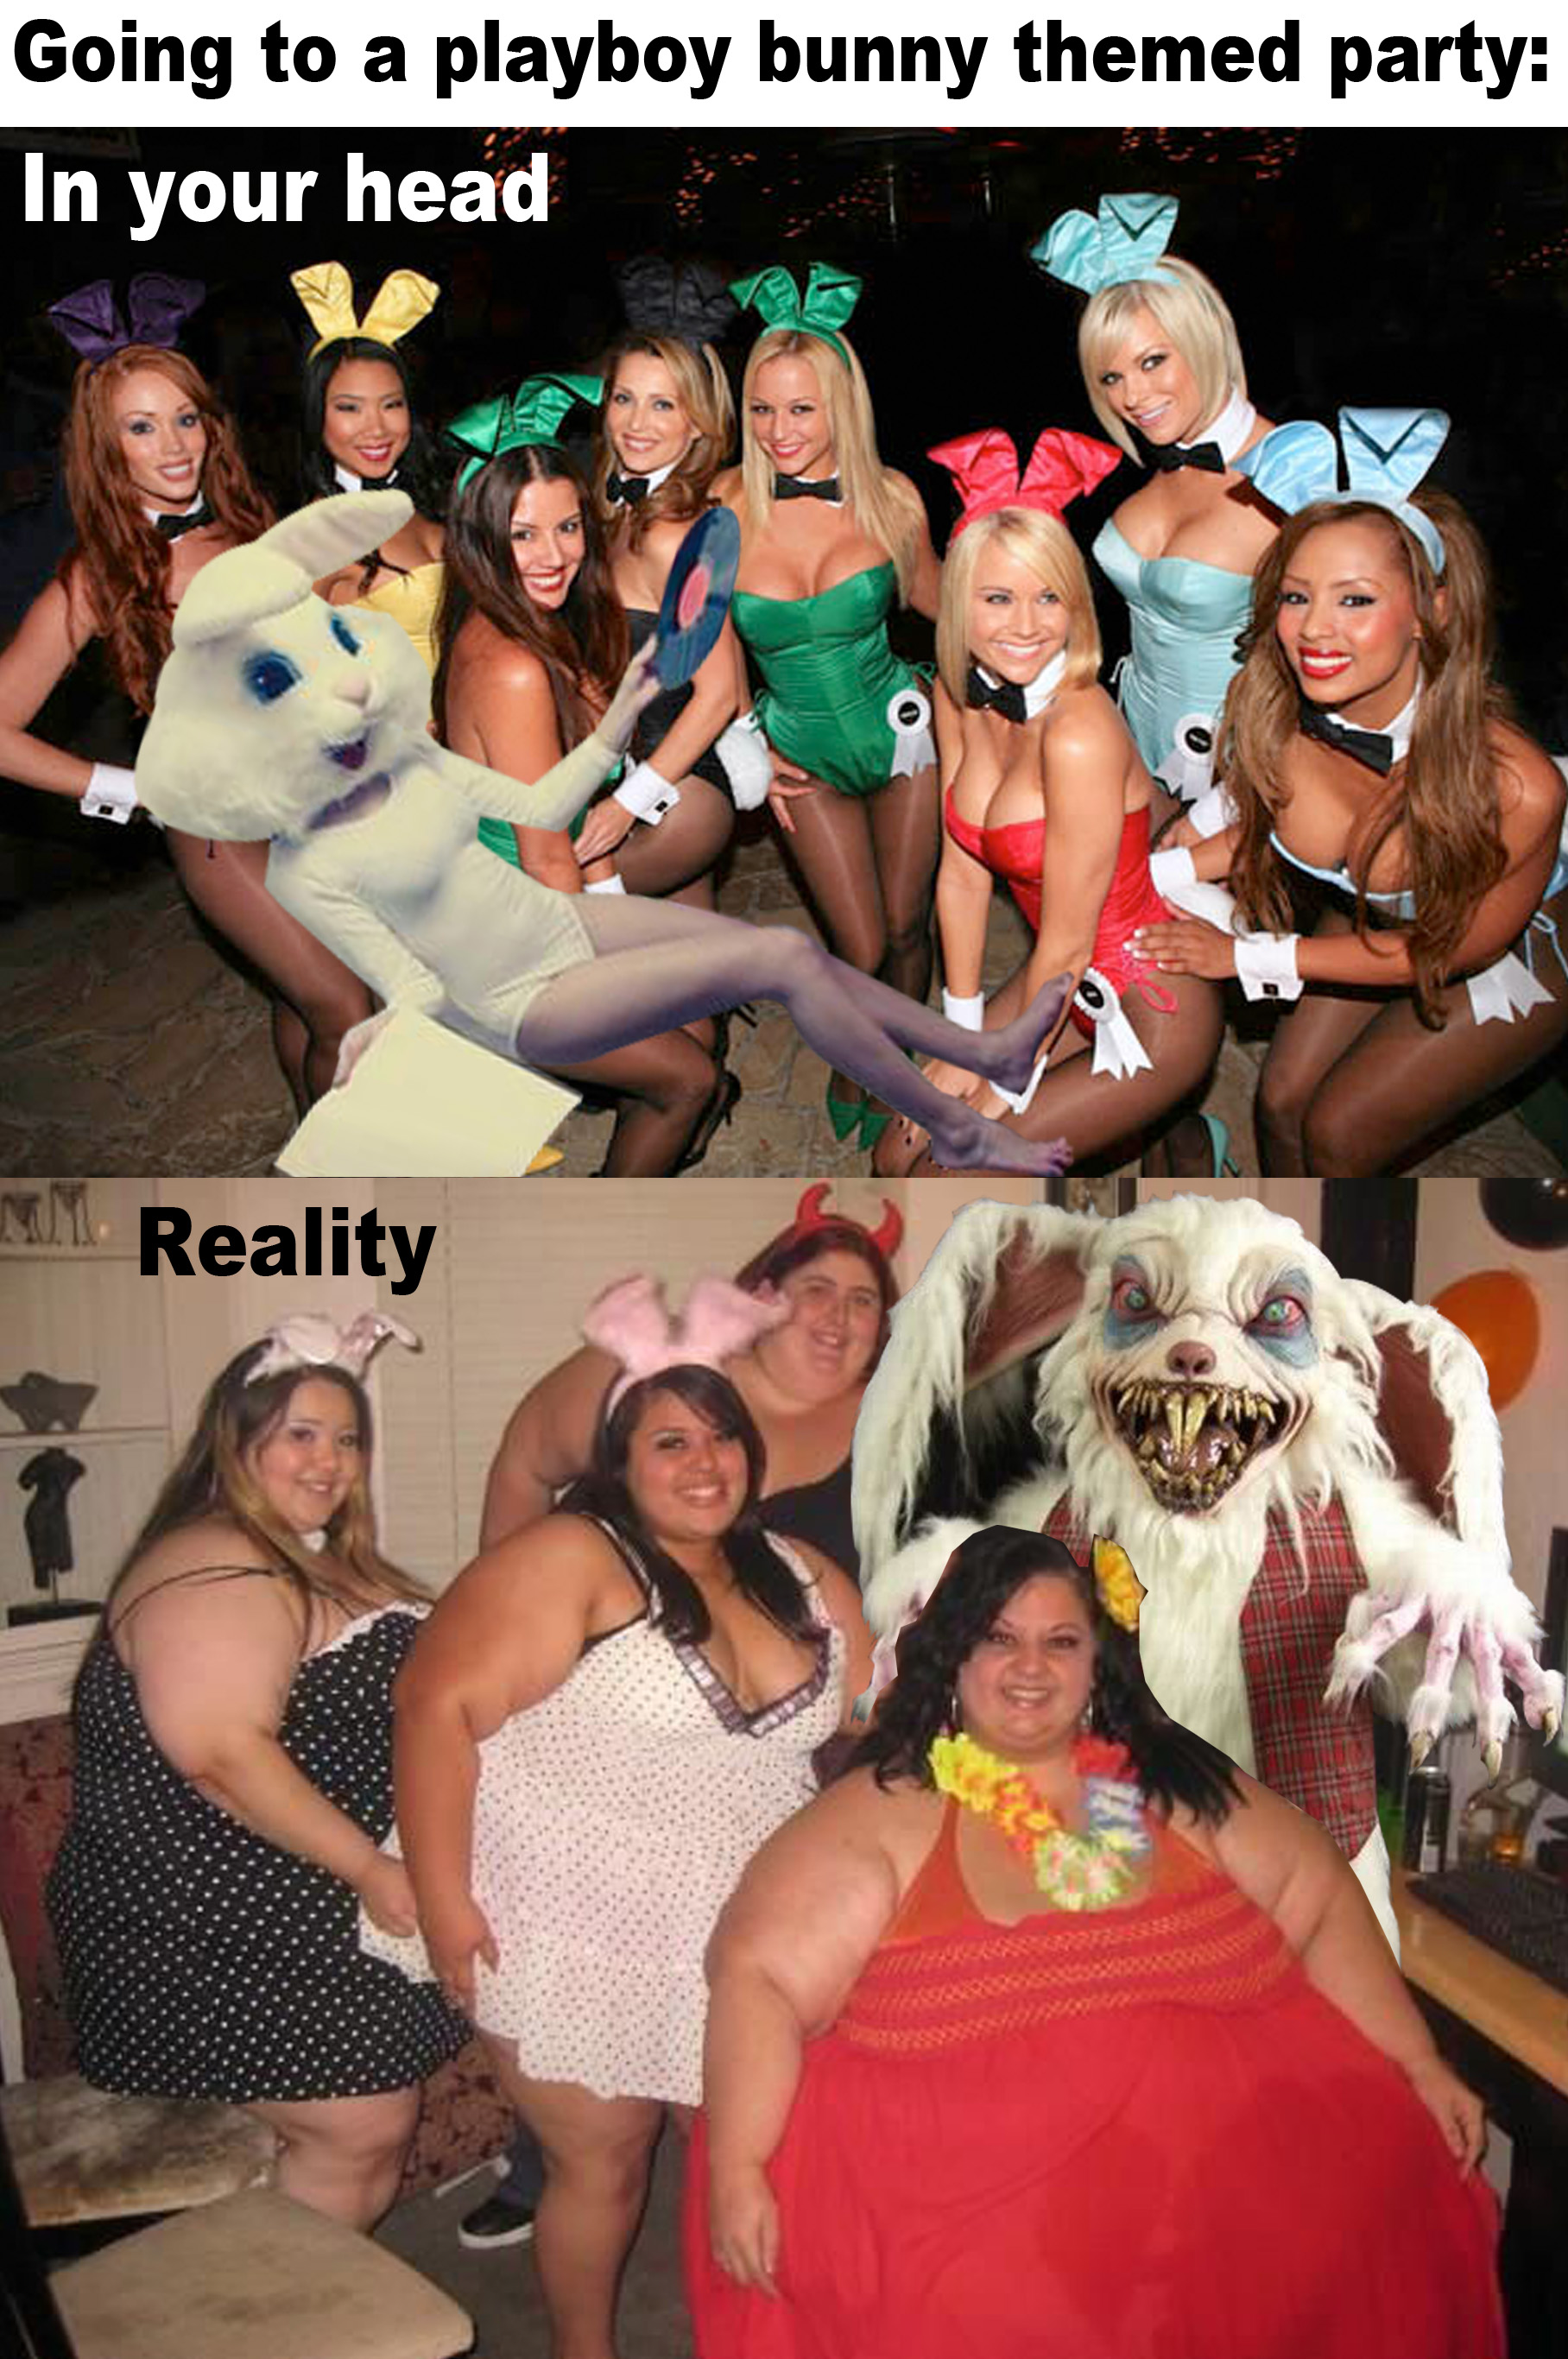 fat girl bachelorette party - Going to a playboy bunny themed party In your head Mi Reality